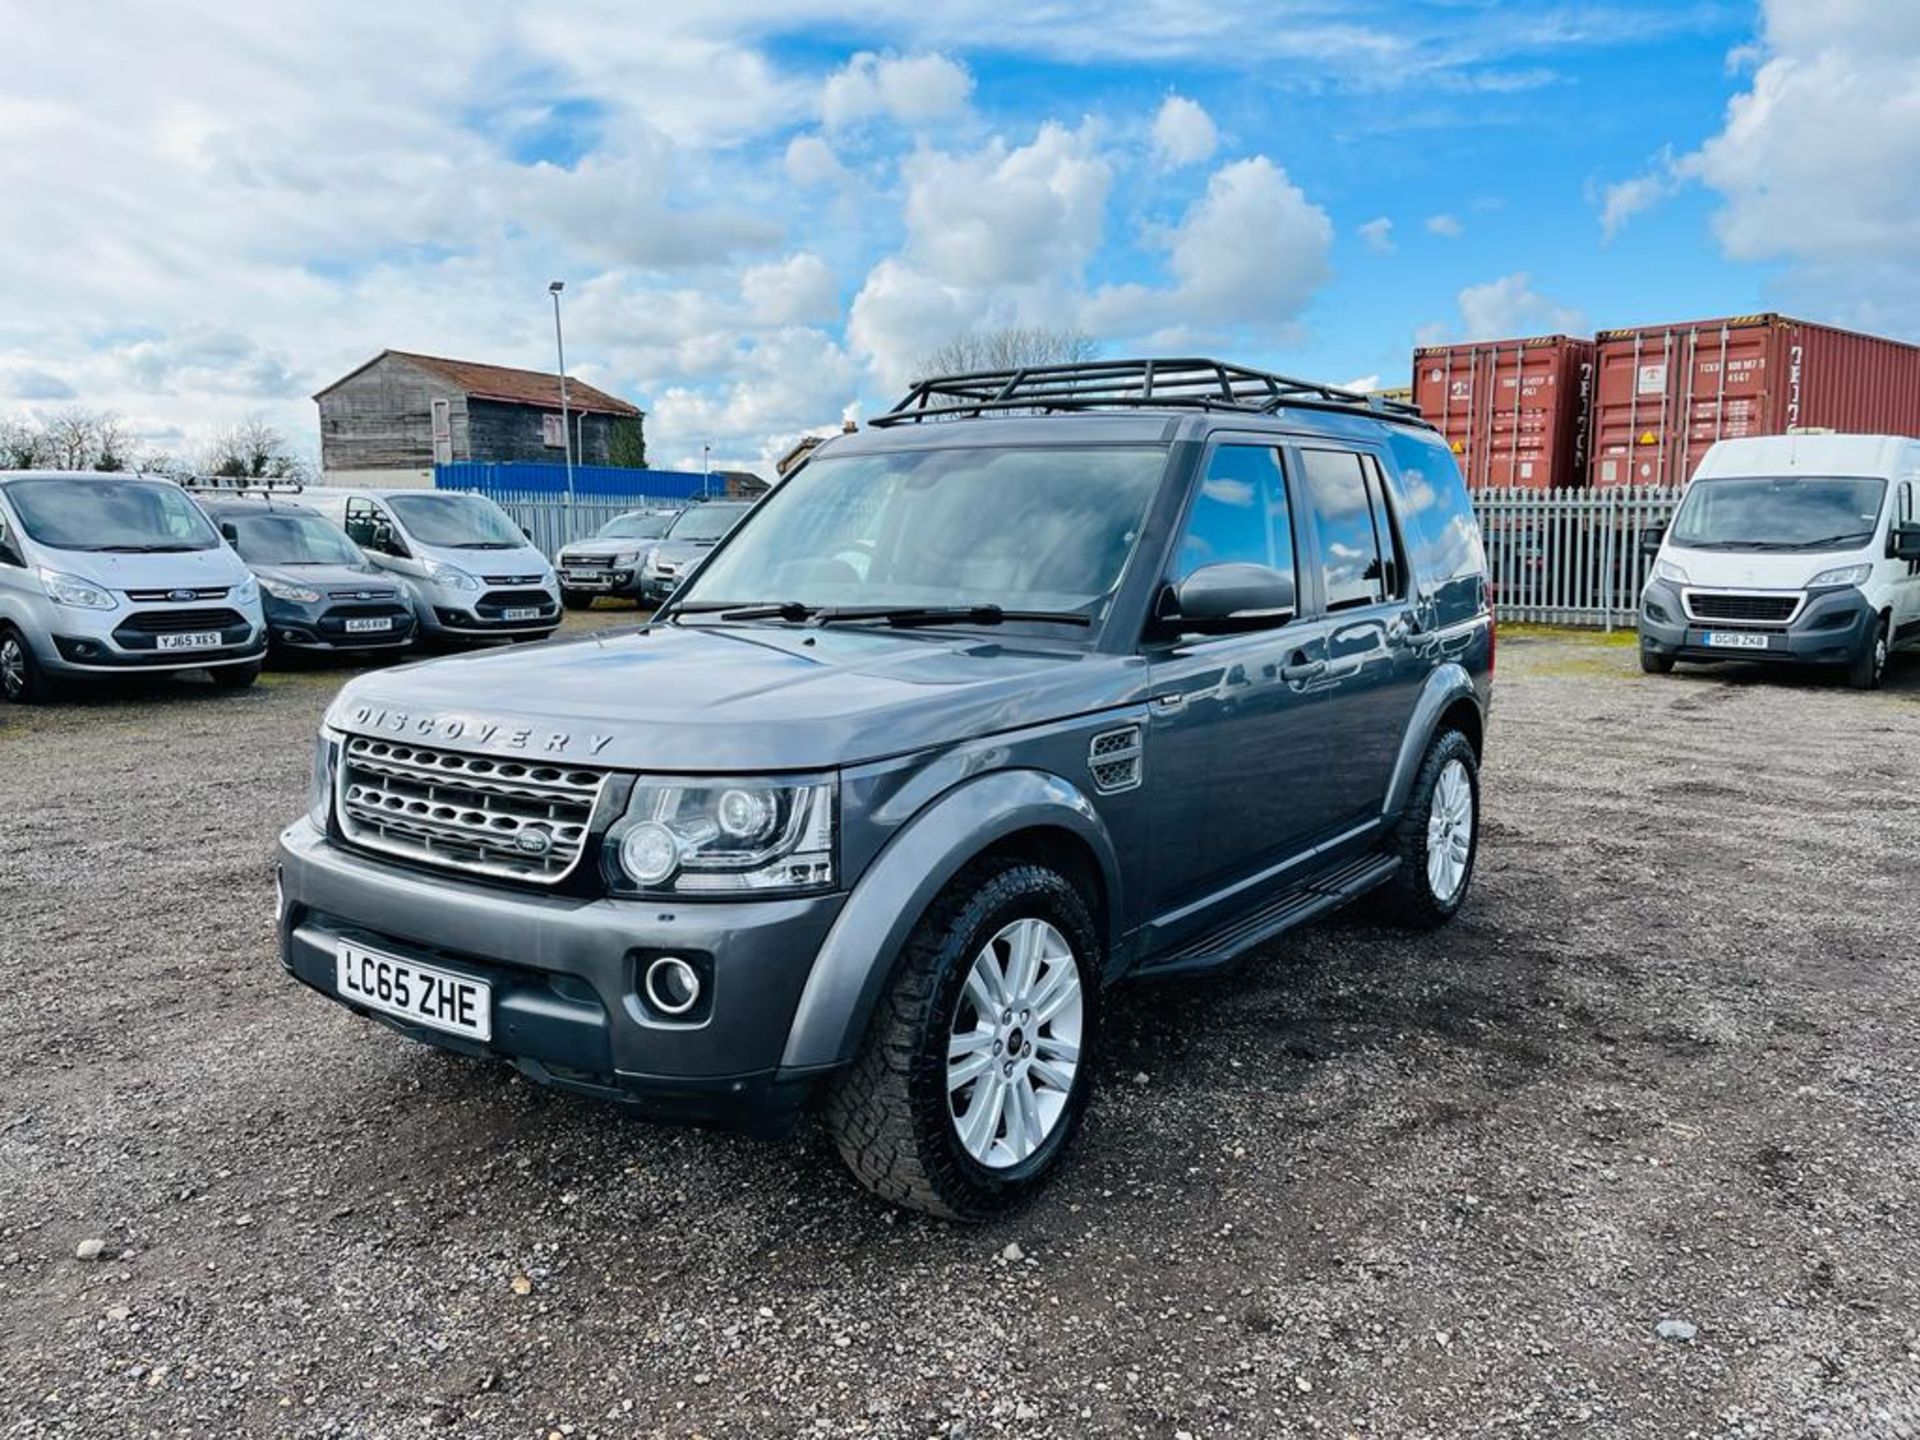 **ON SALE**Land Rover Discovery 3.0 SDV6 Auto SE 2016 '65 Reg' Sat Nav - 4WD - A/C -Only 97214 Miles - Image 3 of 26